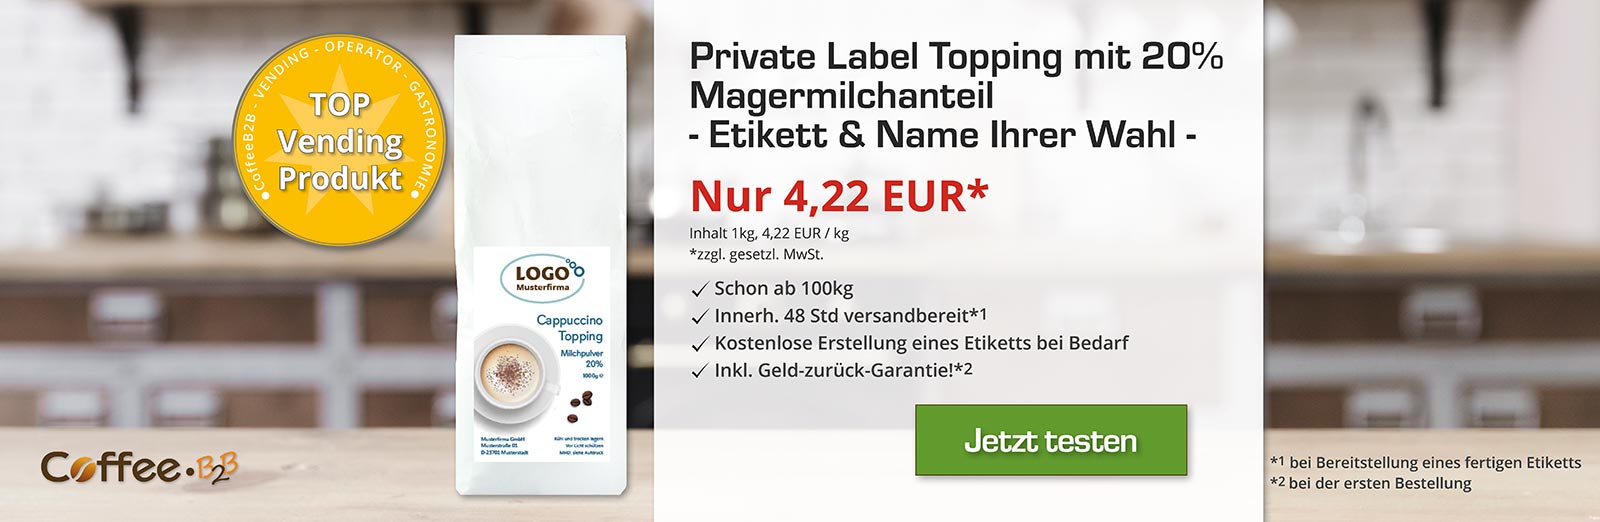     Private Label Cappuccino Topping 2 Milchpulver - 1kg 20% Magermilchanteil